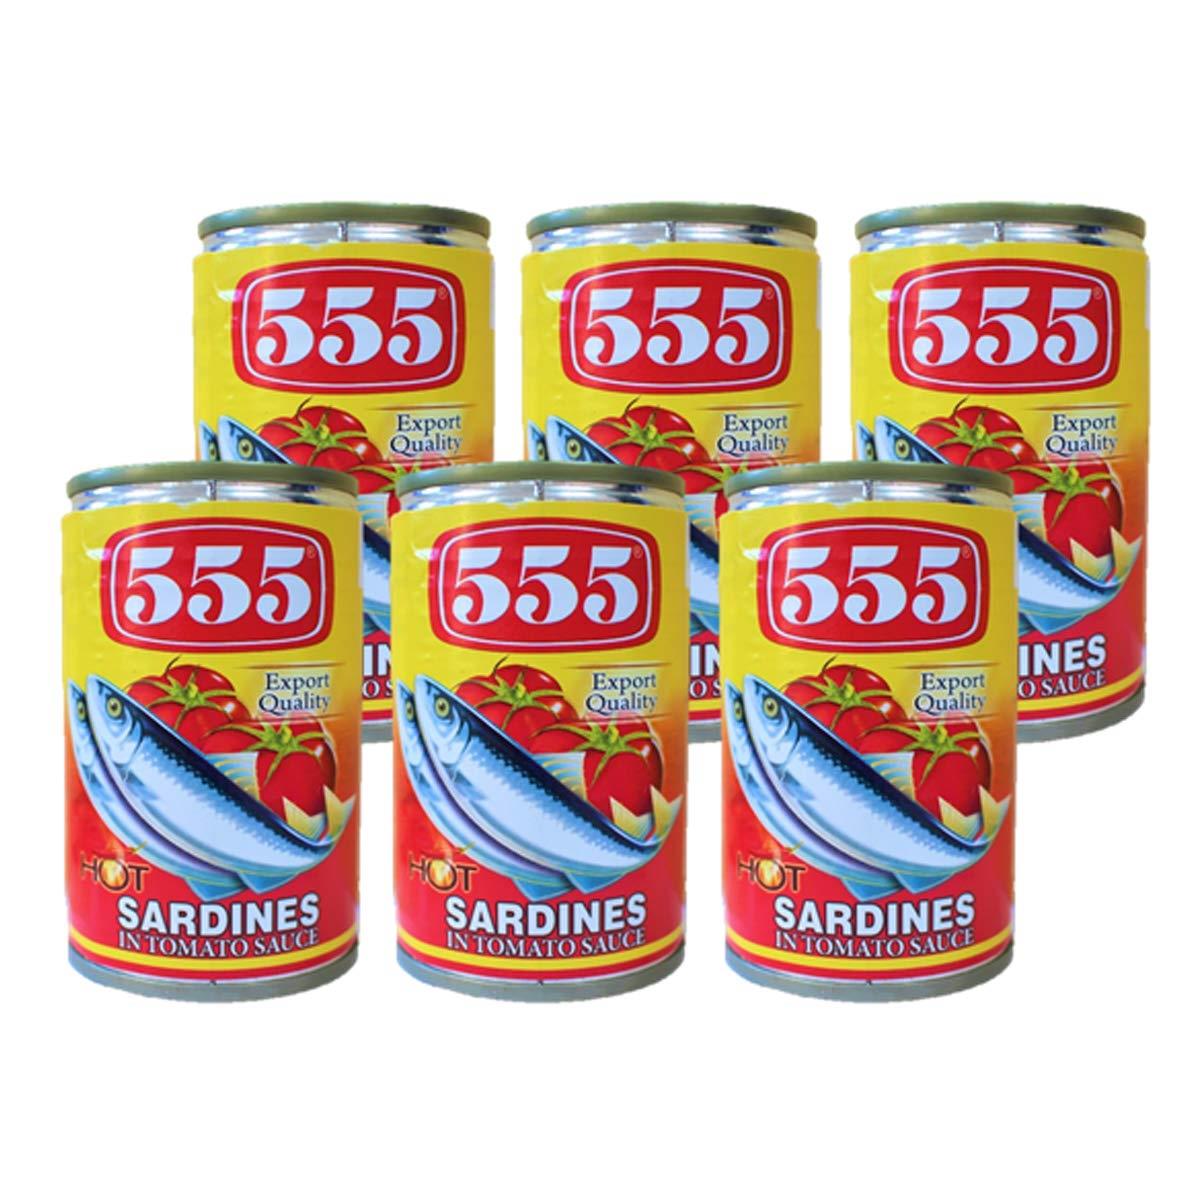 555 Sardines in Tomato Sauce with Chili (Hot) 5.5oz (155g), 6 Pack